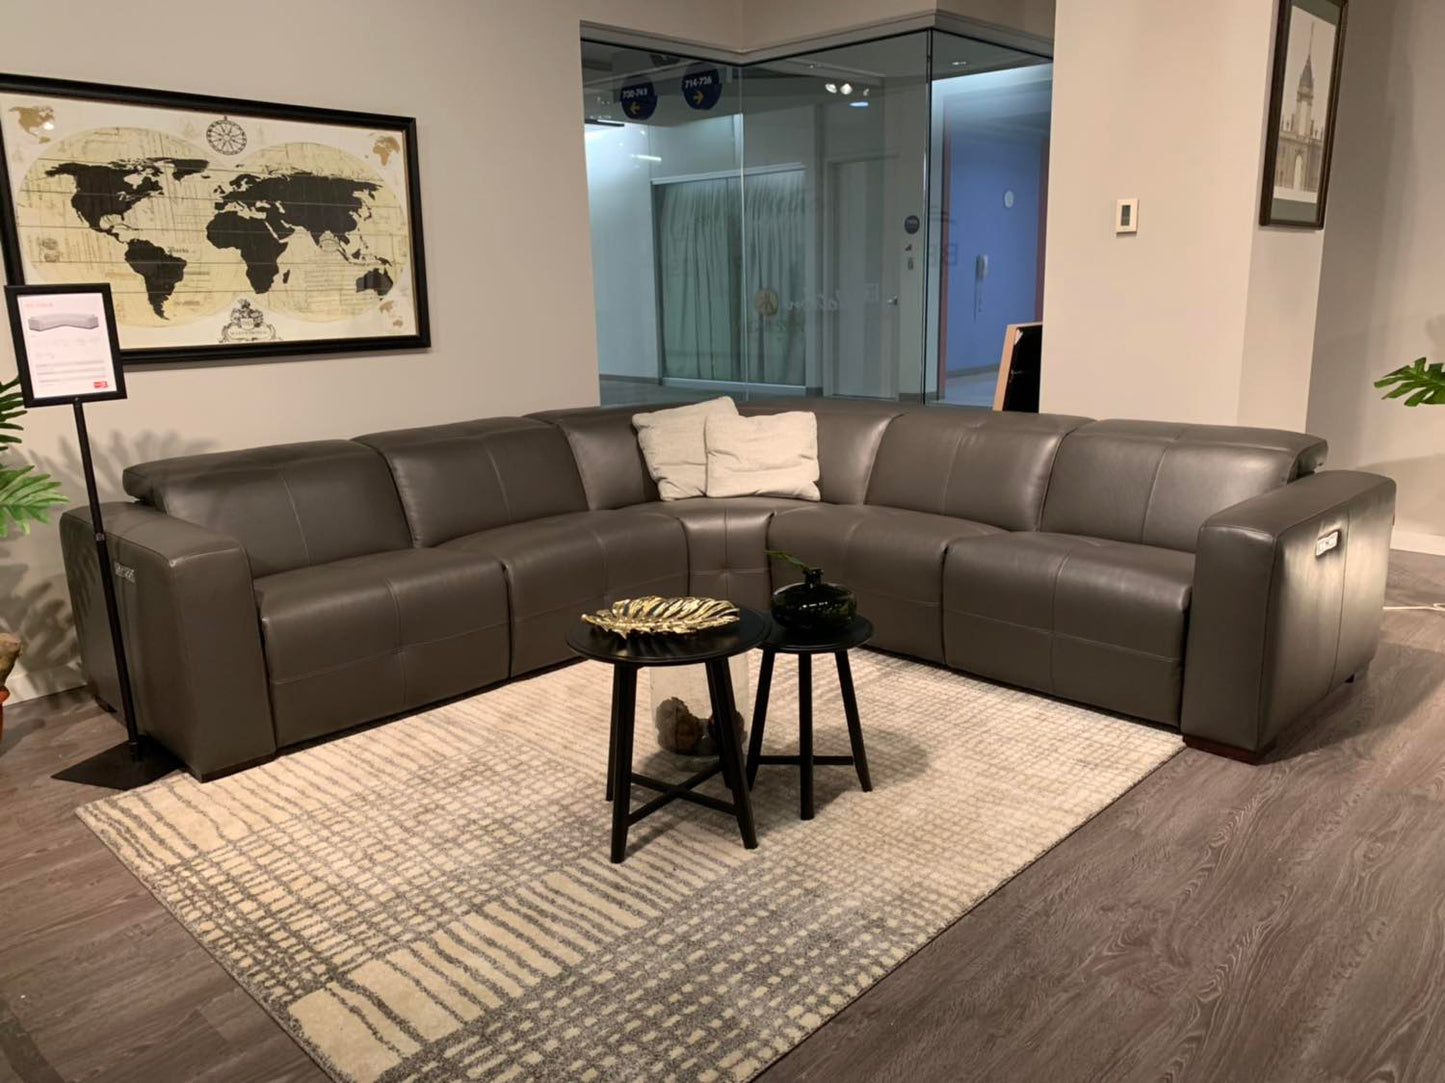 EMF KM398H - SECTIONAL W/3 POWER RECLINERS